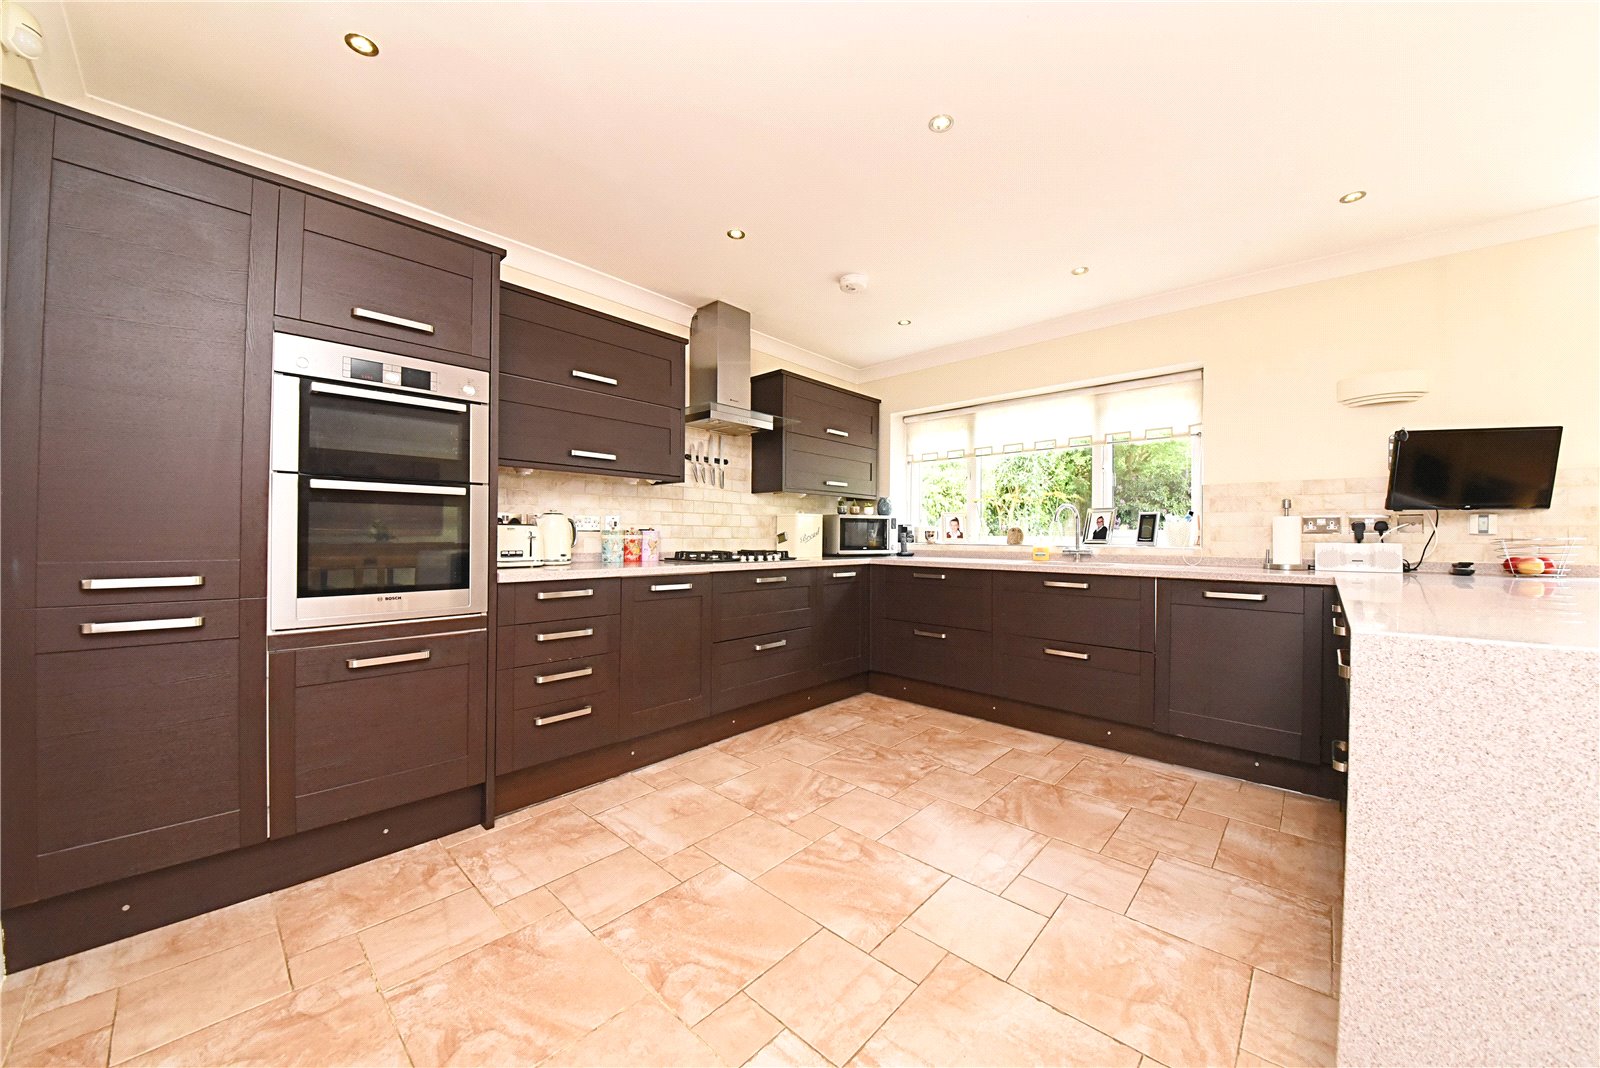 4 bed house for sale in Embry Way, Stanmore  - Property Image 3